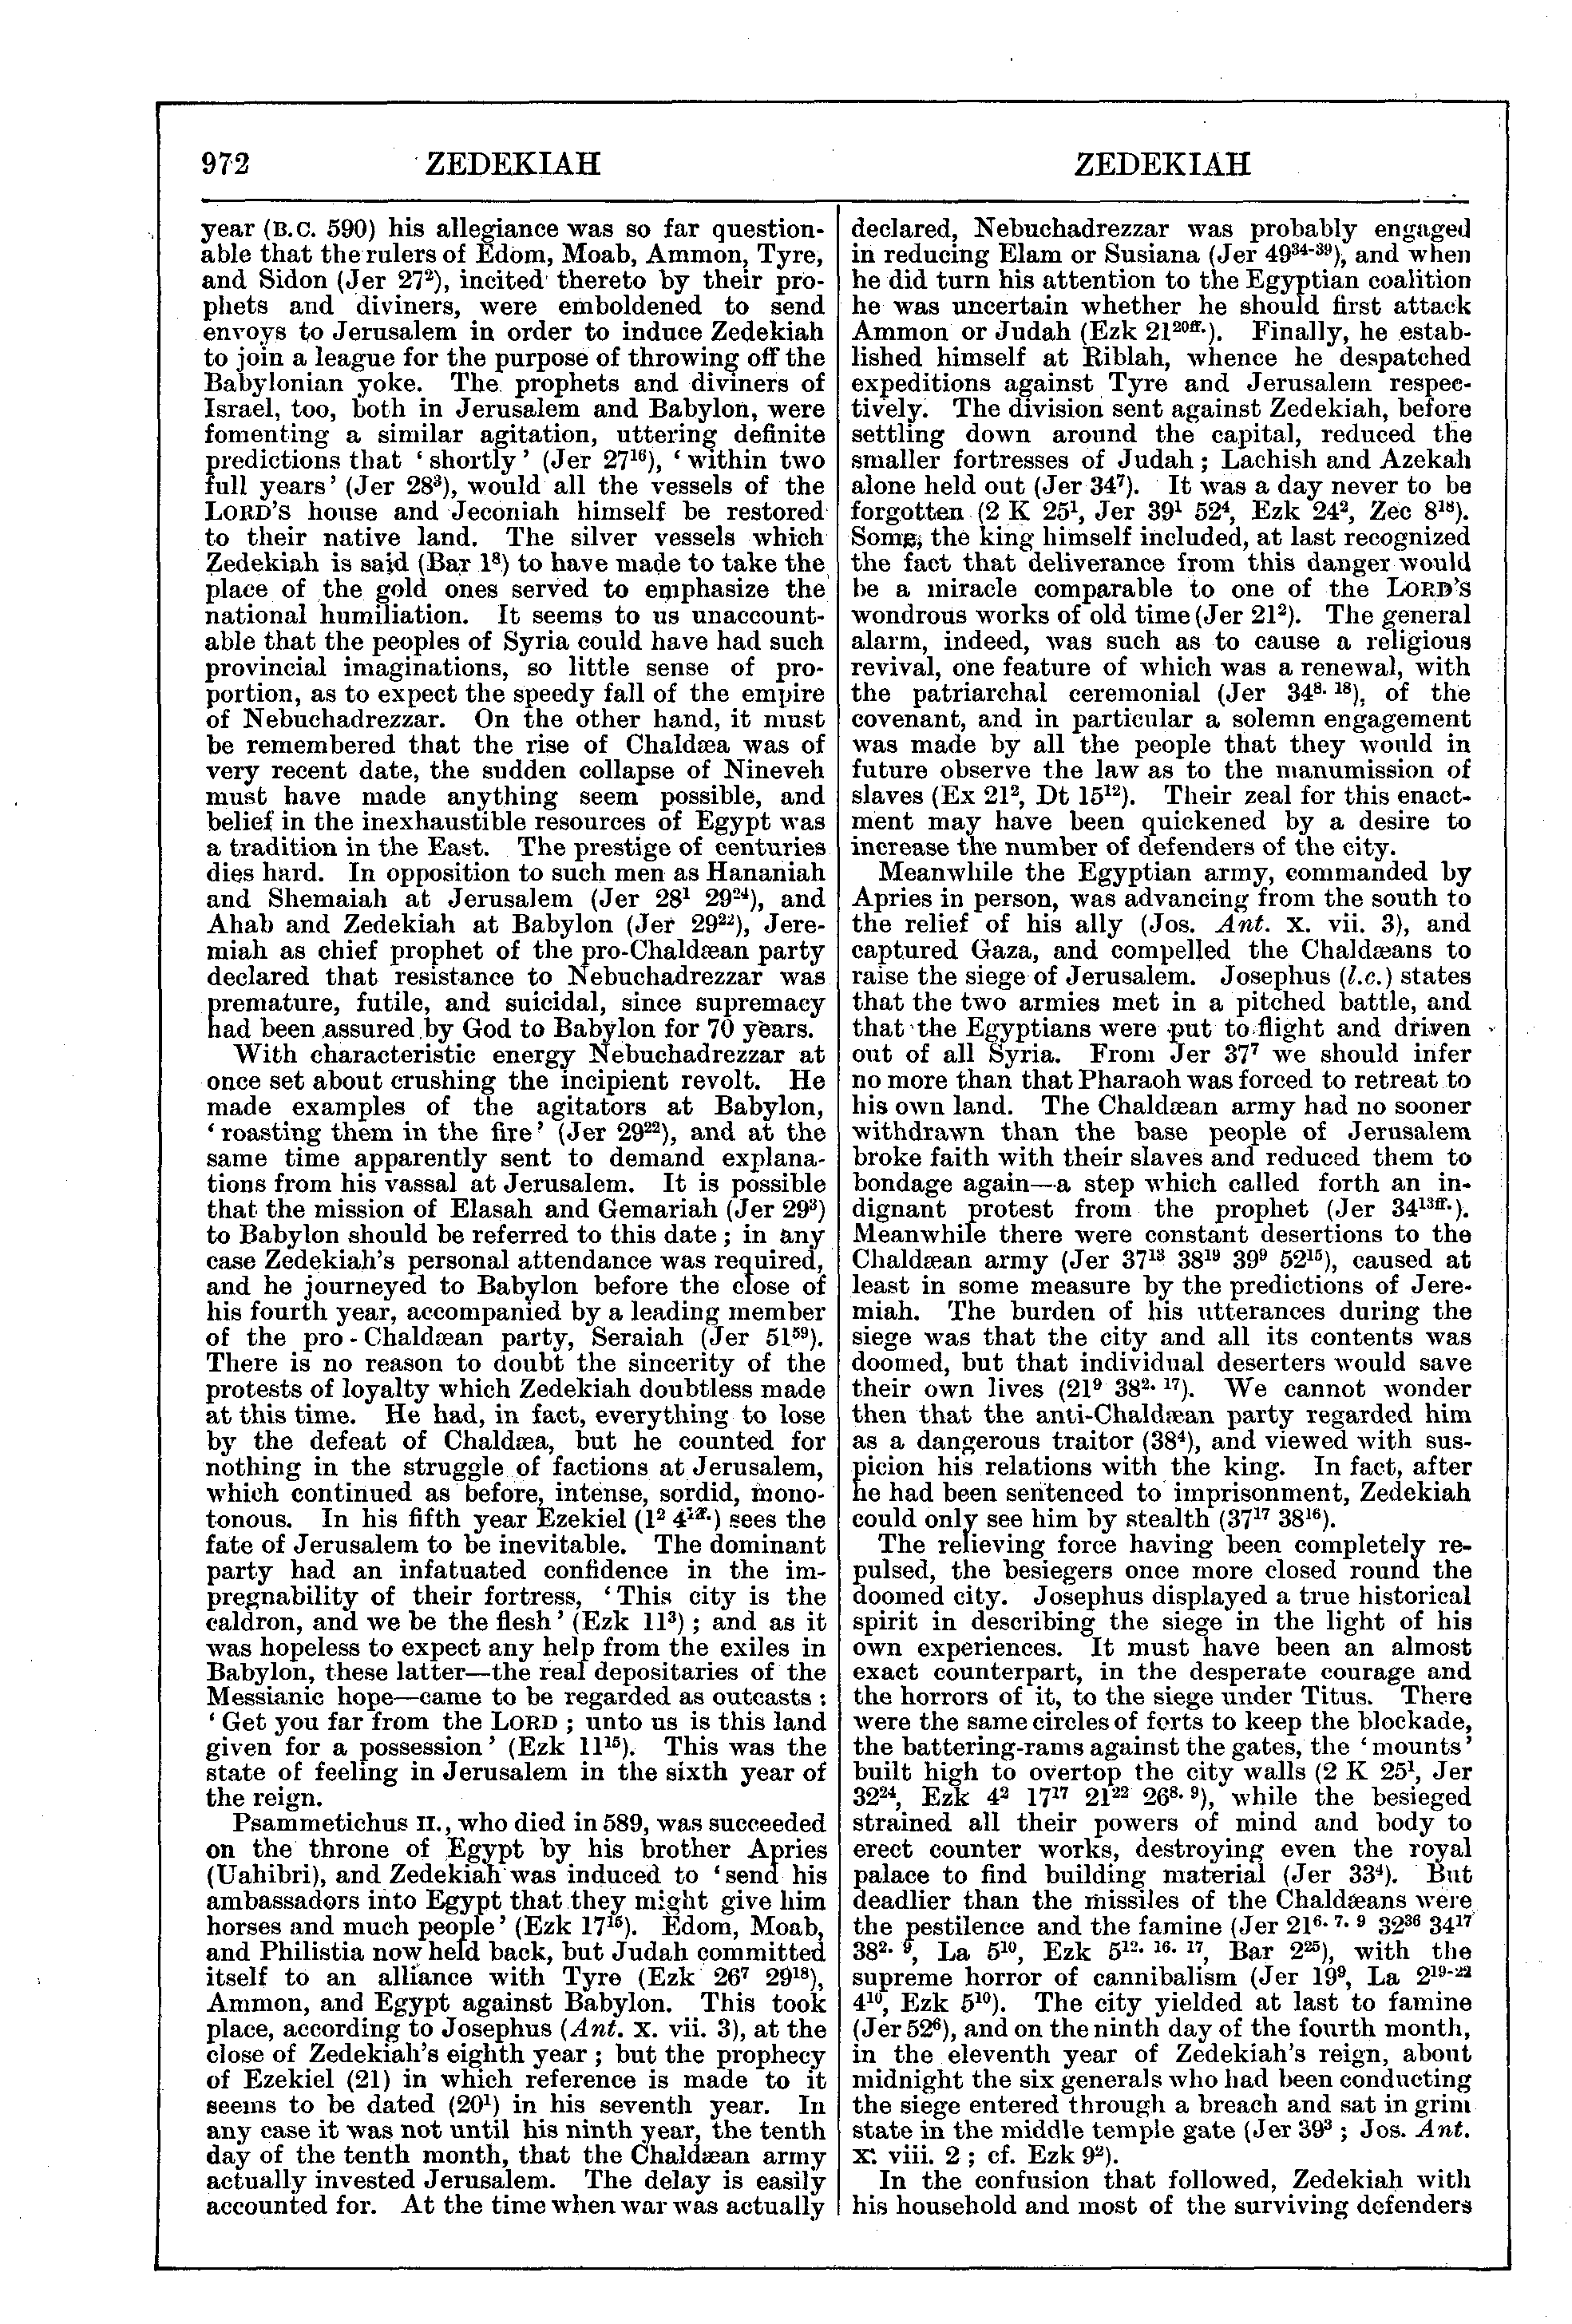 Image of page 972